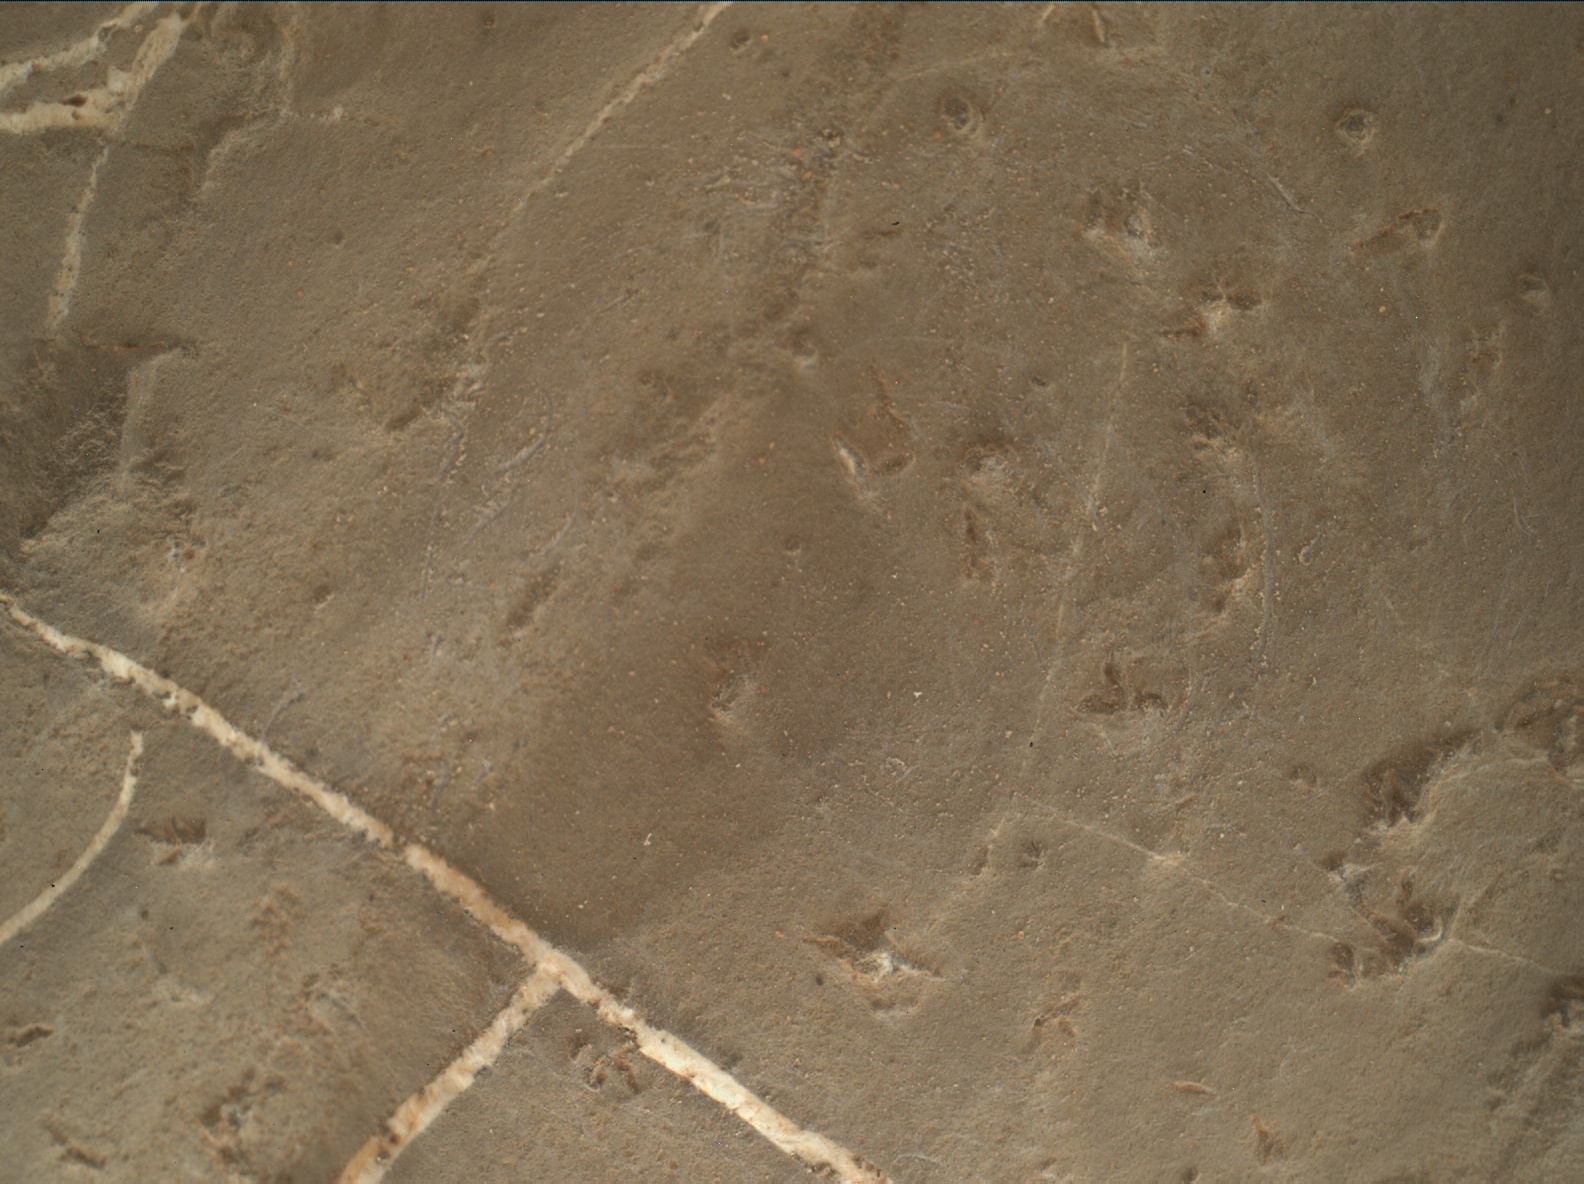 Nasa's Mars rover Curiosity acquired this image using its Mars Hand Lens Imager (MAHLI) on Sol 2223